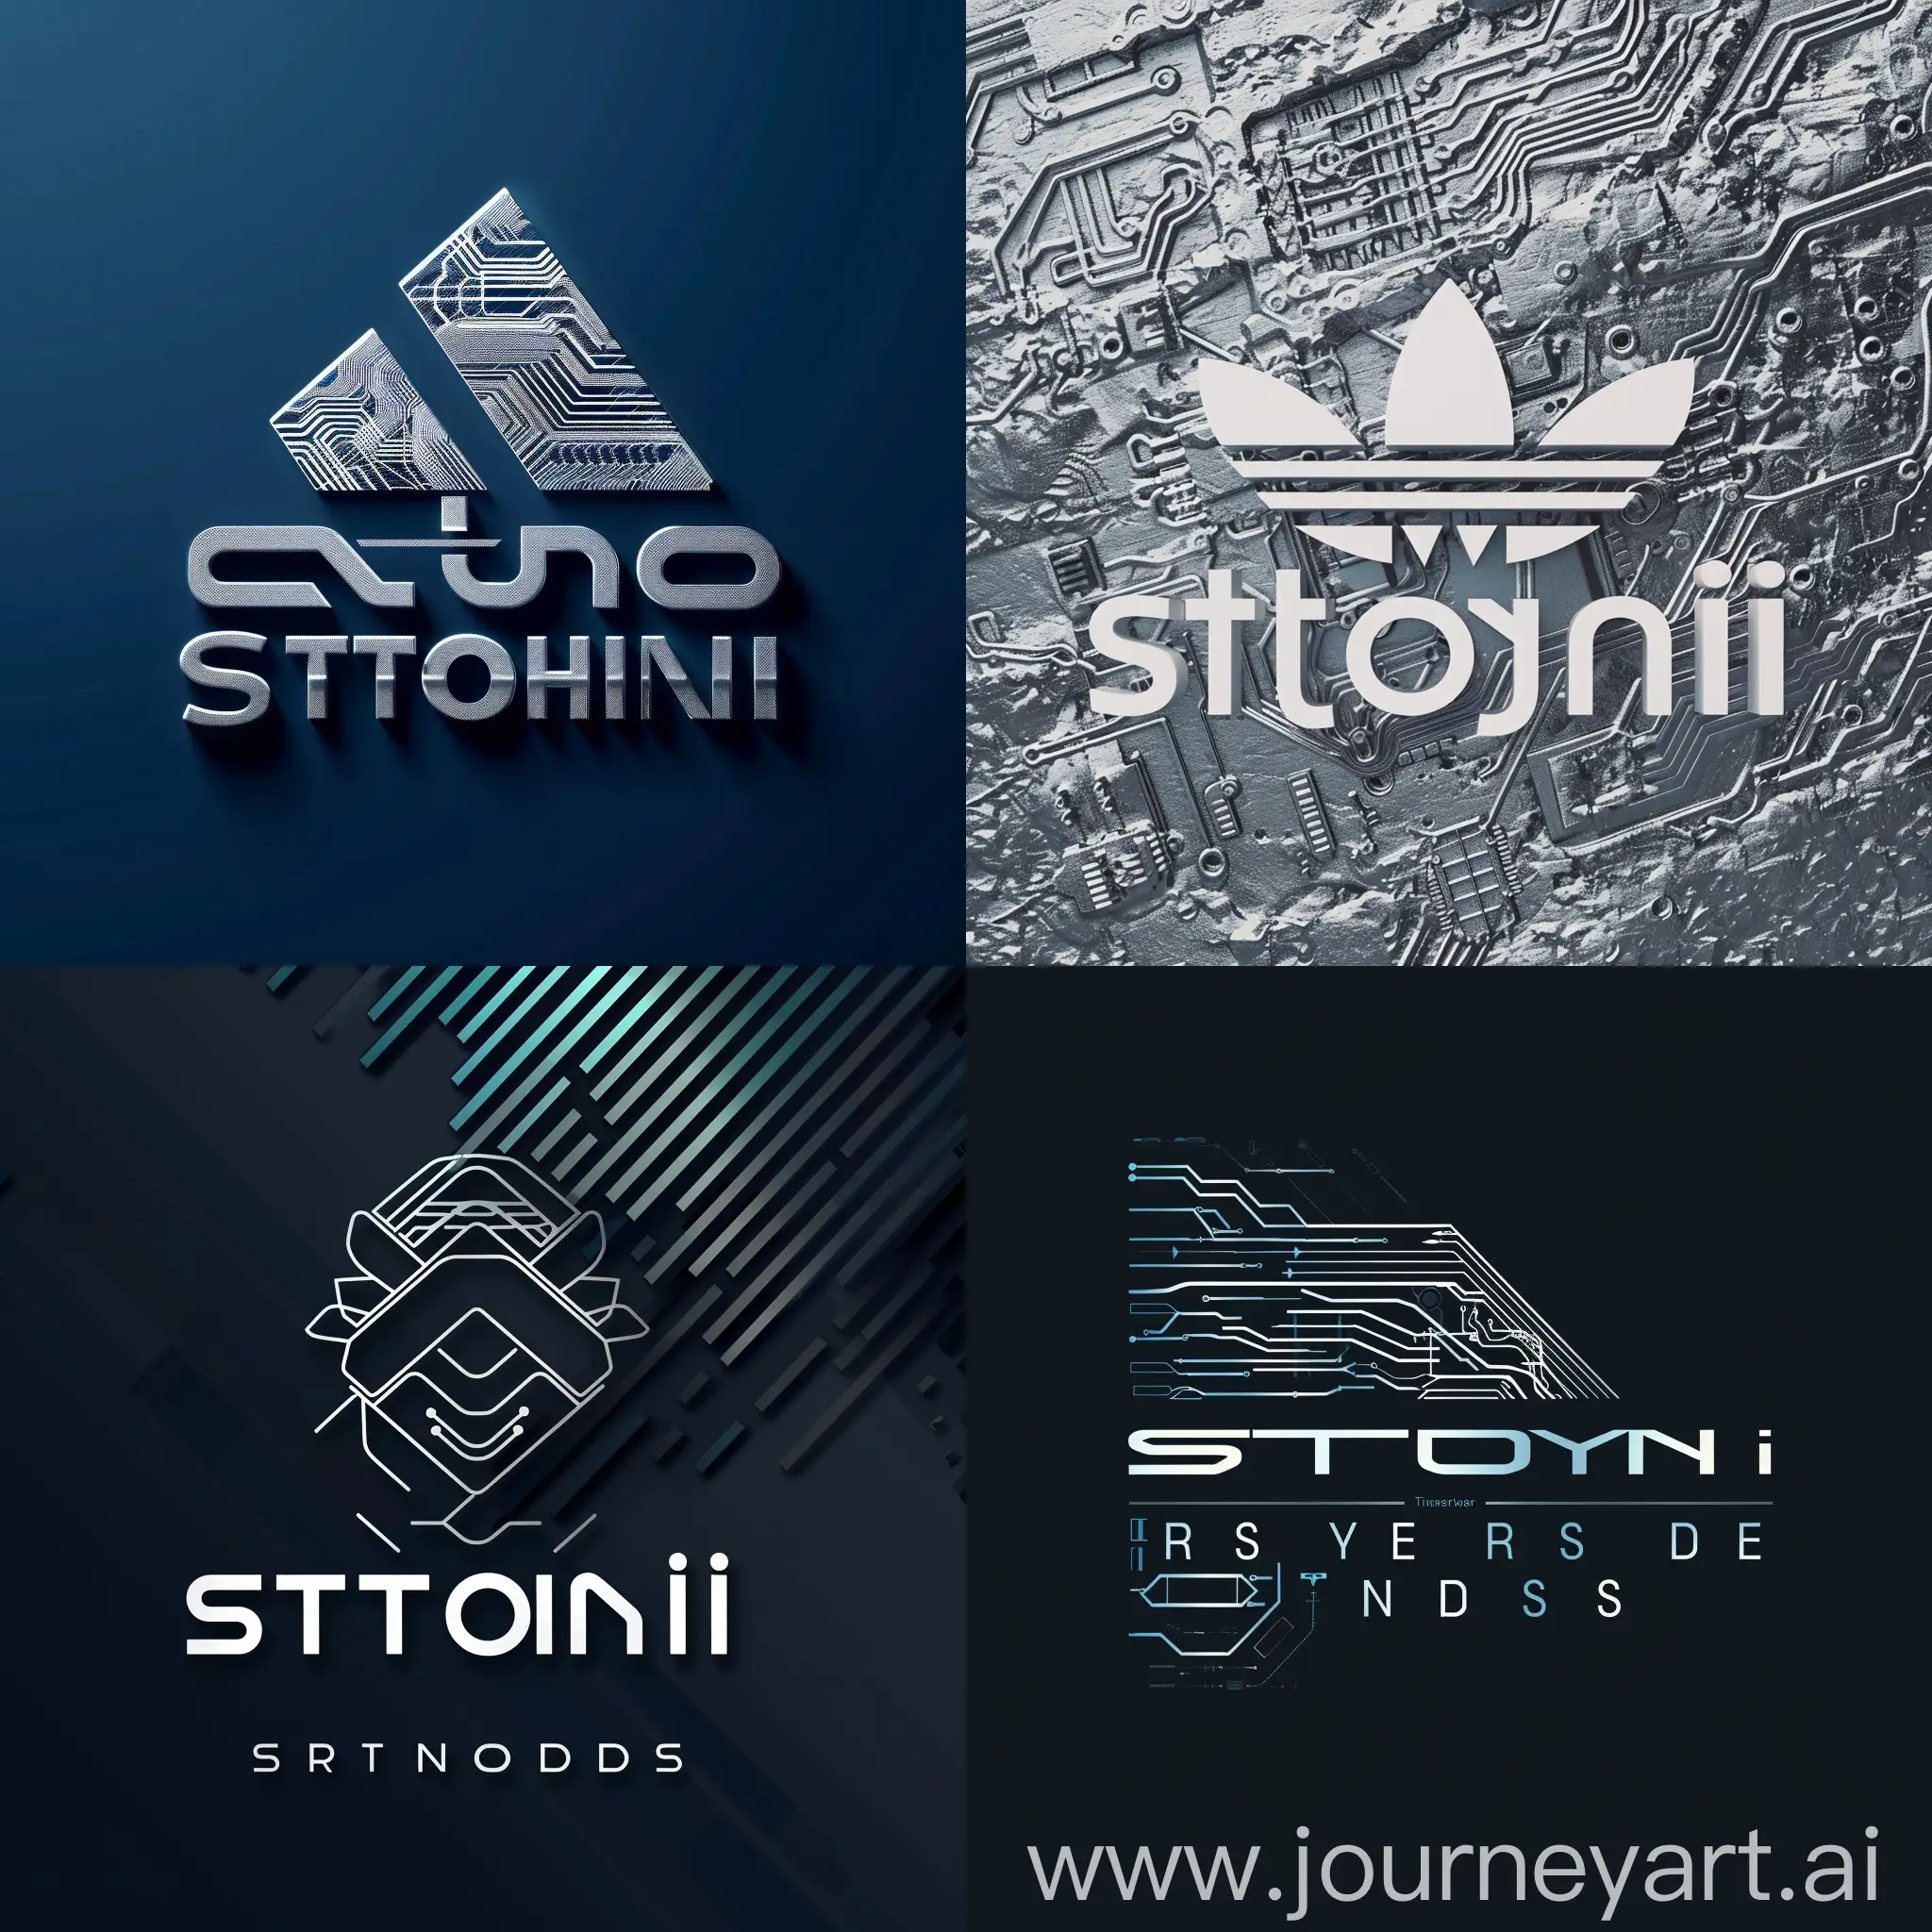 Brand Name: Styloni  Target Audience: Technology Industry  Brand Values: Style, Innovation, Cutting-Edge Technology  Color Scheme: Sleek and futuristic colors (e.g., metallic silver, electric blue)  Symbol:  A minimalist and impactful symbol, similar to the Adidas logo. Consider incorporating subtle AI-related elements: Circuits Binary patterns Stylized futuristic elements Typography:  Modern, sans-serif font that exudes professionalism and sophistication. Consider fonts trending in the tech industry (clean, minimalist, visually striking). Design Inspiration:  Timeless and iconic, like the Adidas logo